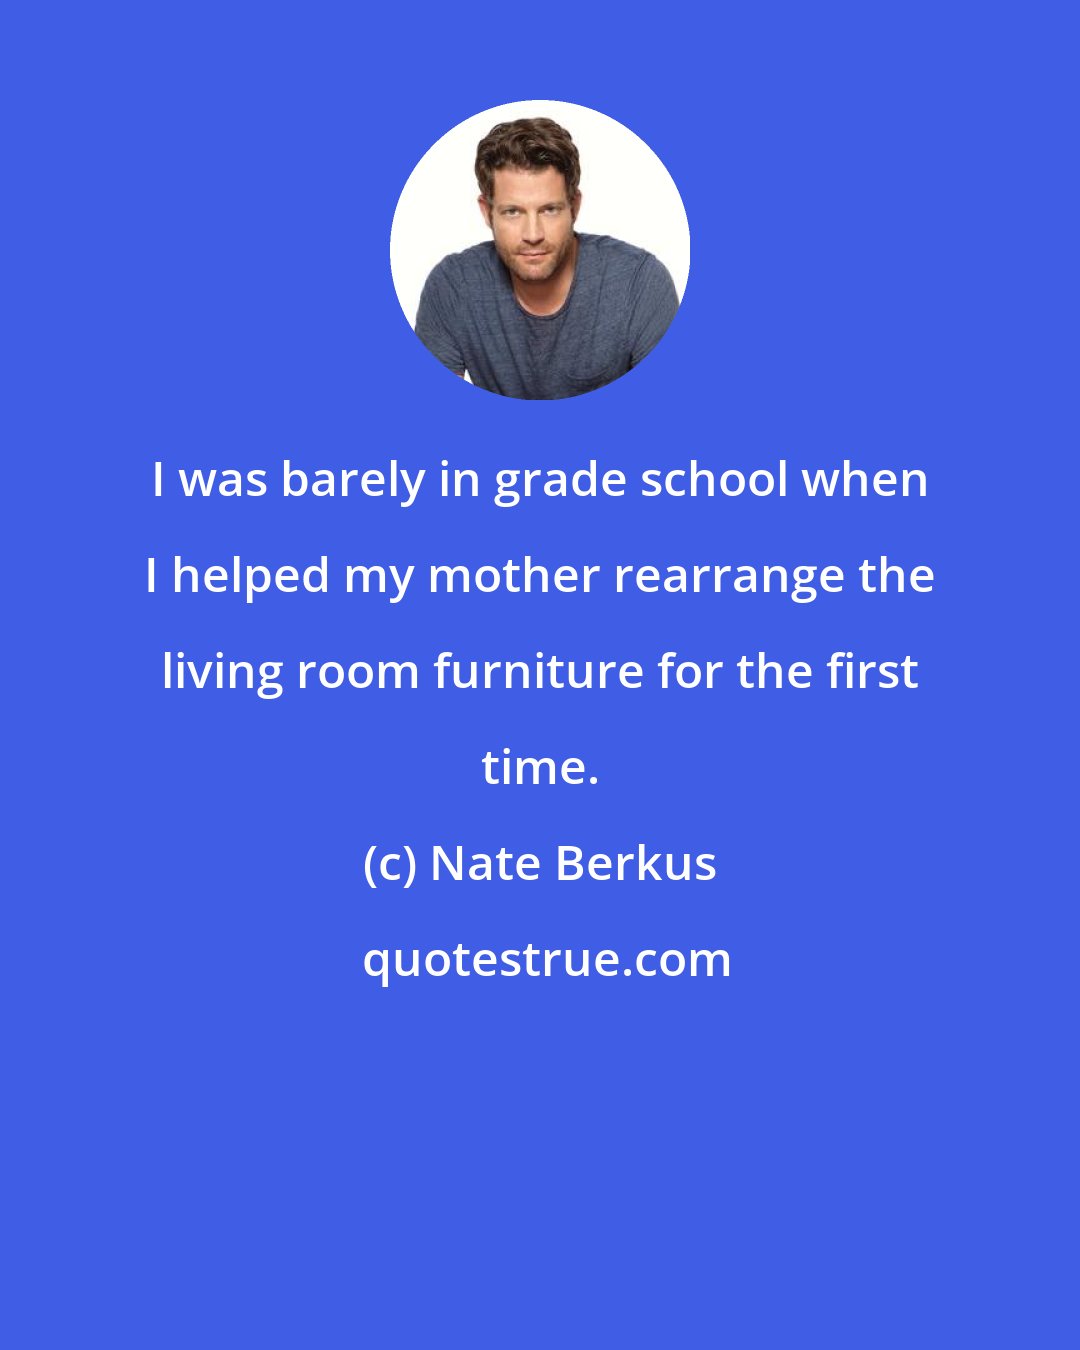 Nate Berkus: I was barely in grade school when I helped my mother rearrange the living room furniture for the first time.